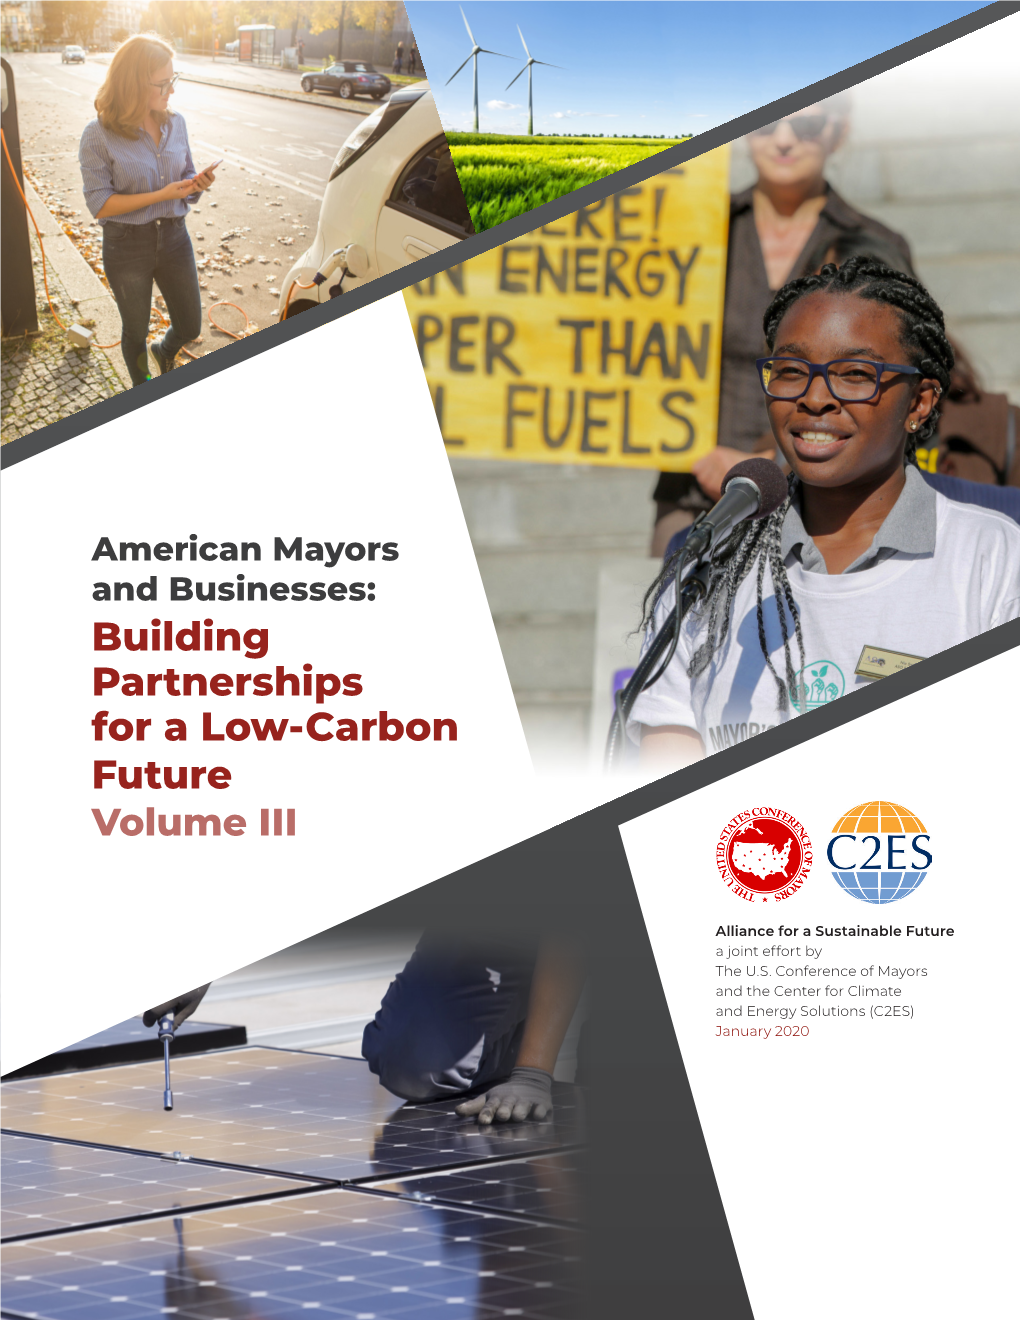 Building Partnerships for a Low-Carbon Future Volume III